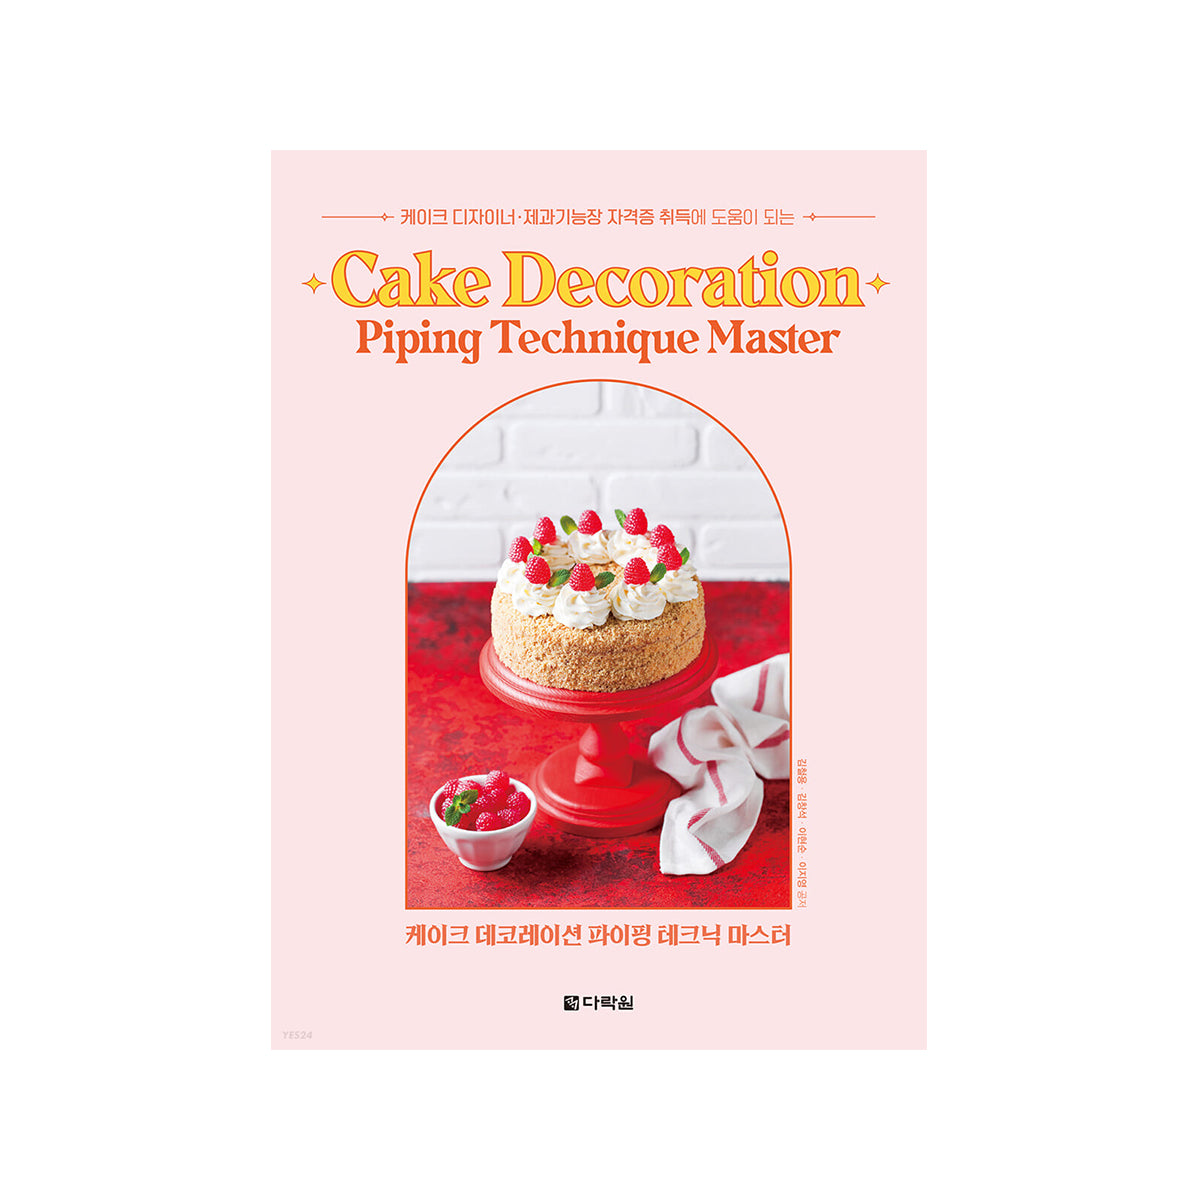 Cupcake decorating tips, Cake piping techniques, Piping techniques